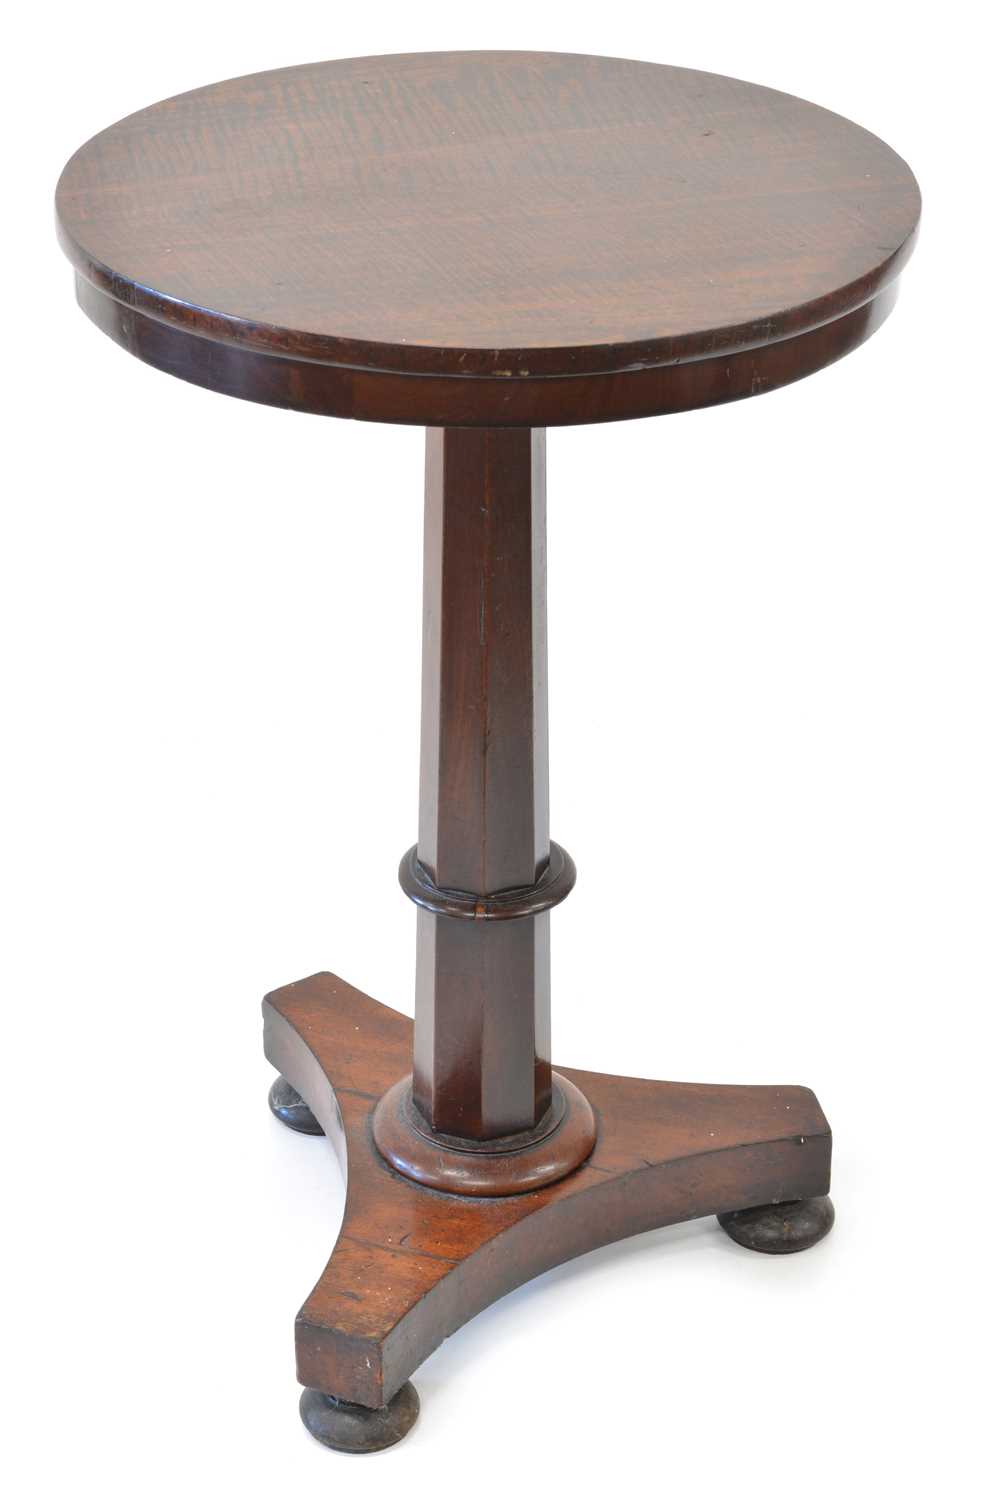 Victorian figured walnut and mahogany occasional table